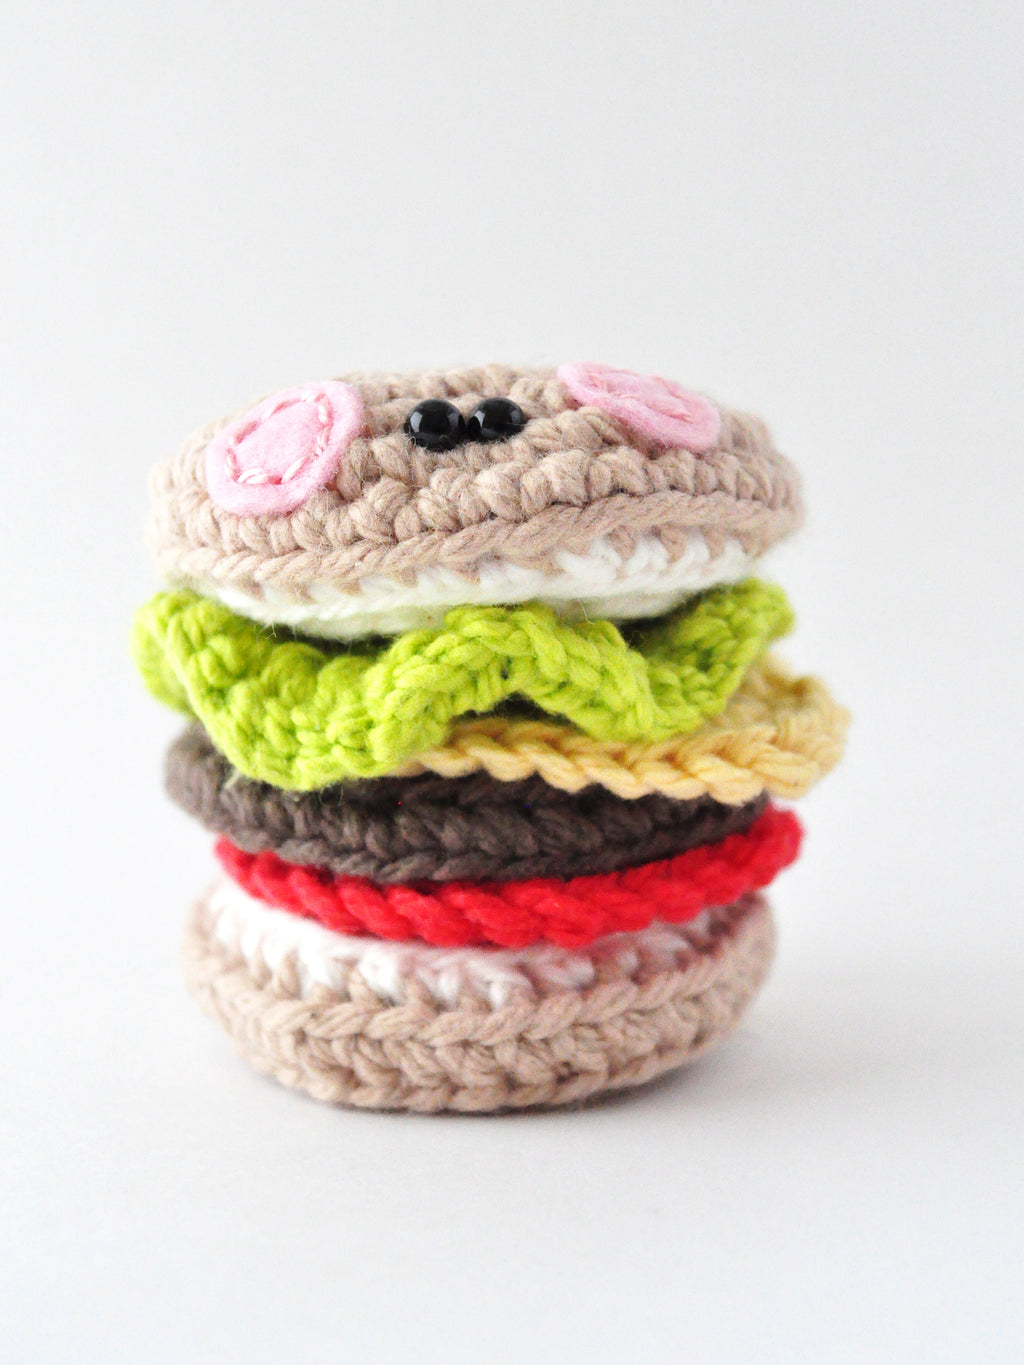 Cheeseburger crochet pattern with step by step photos